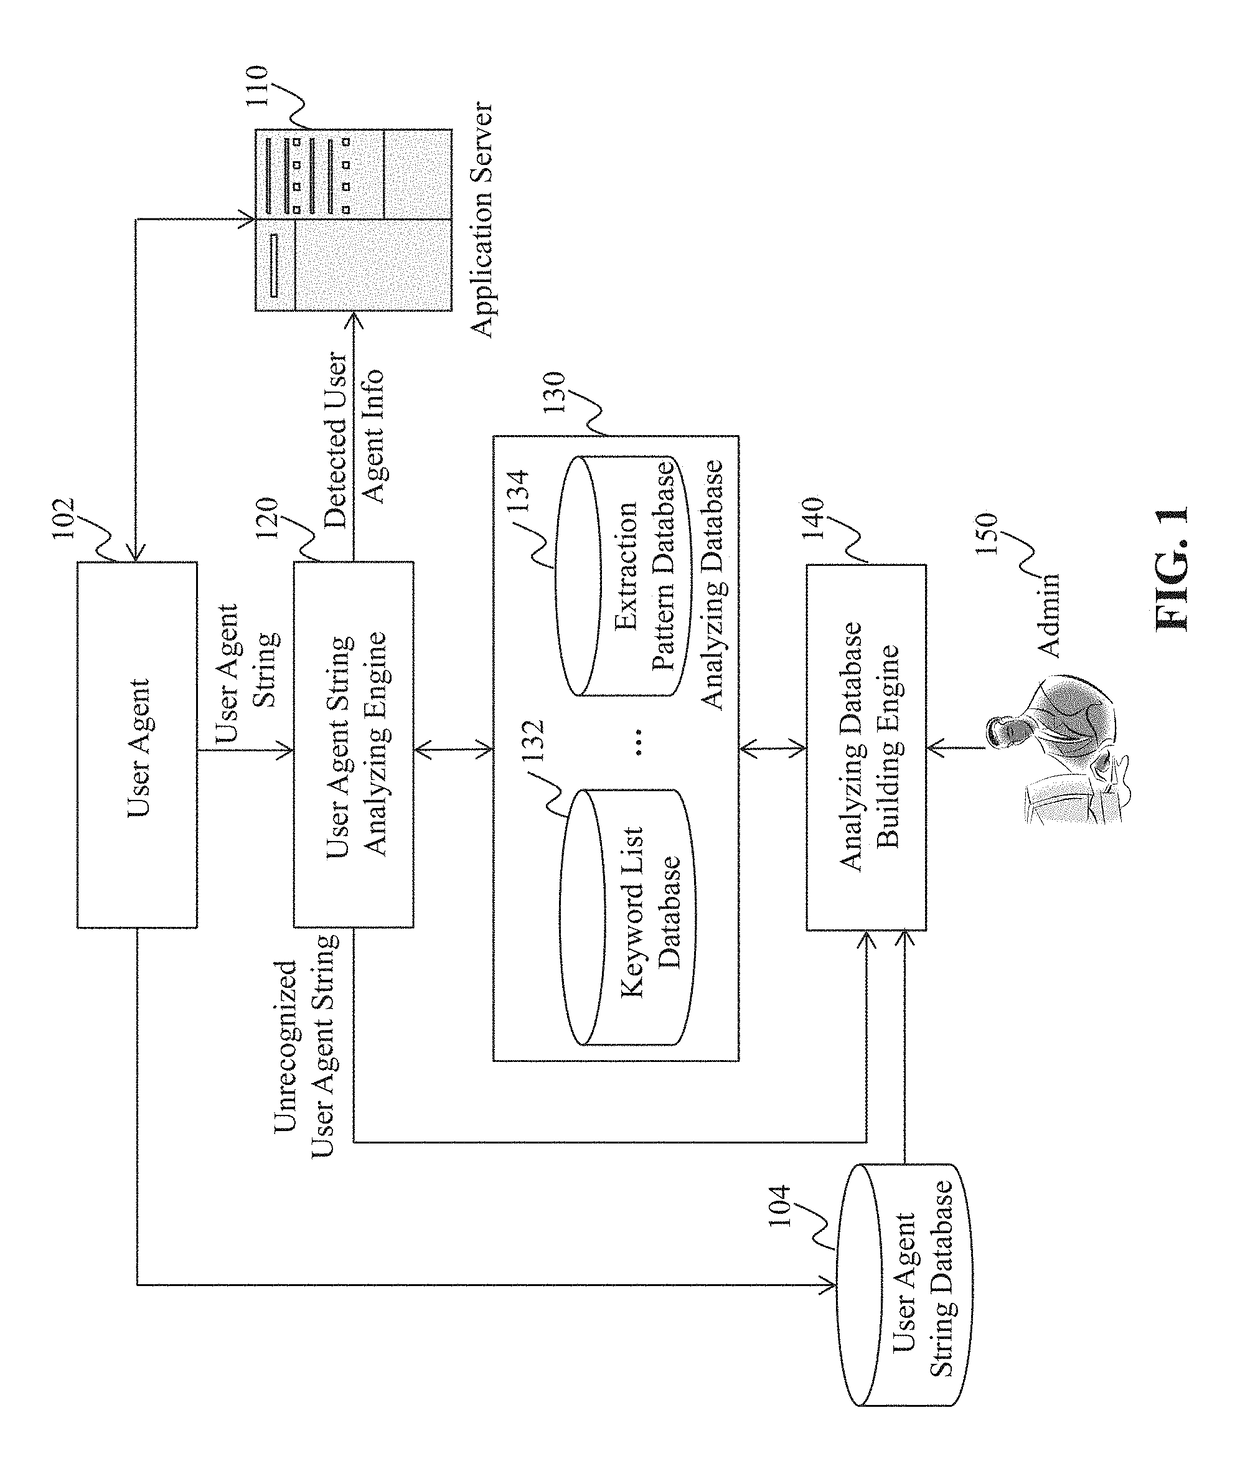 Method and System for Providing a User Agent String Database